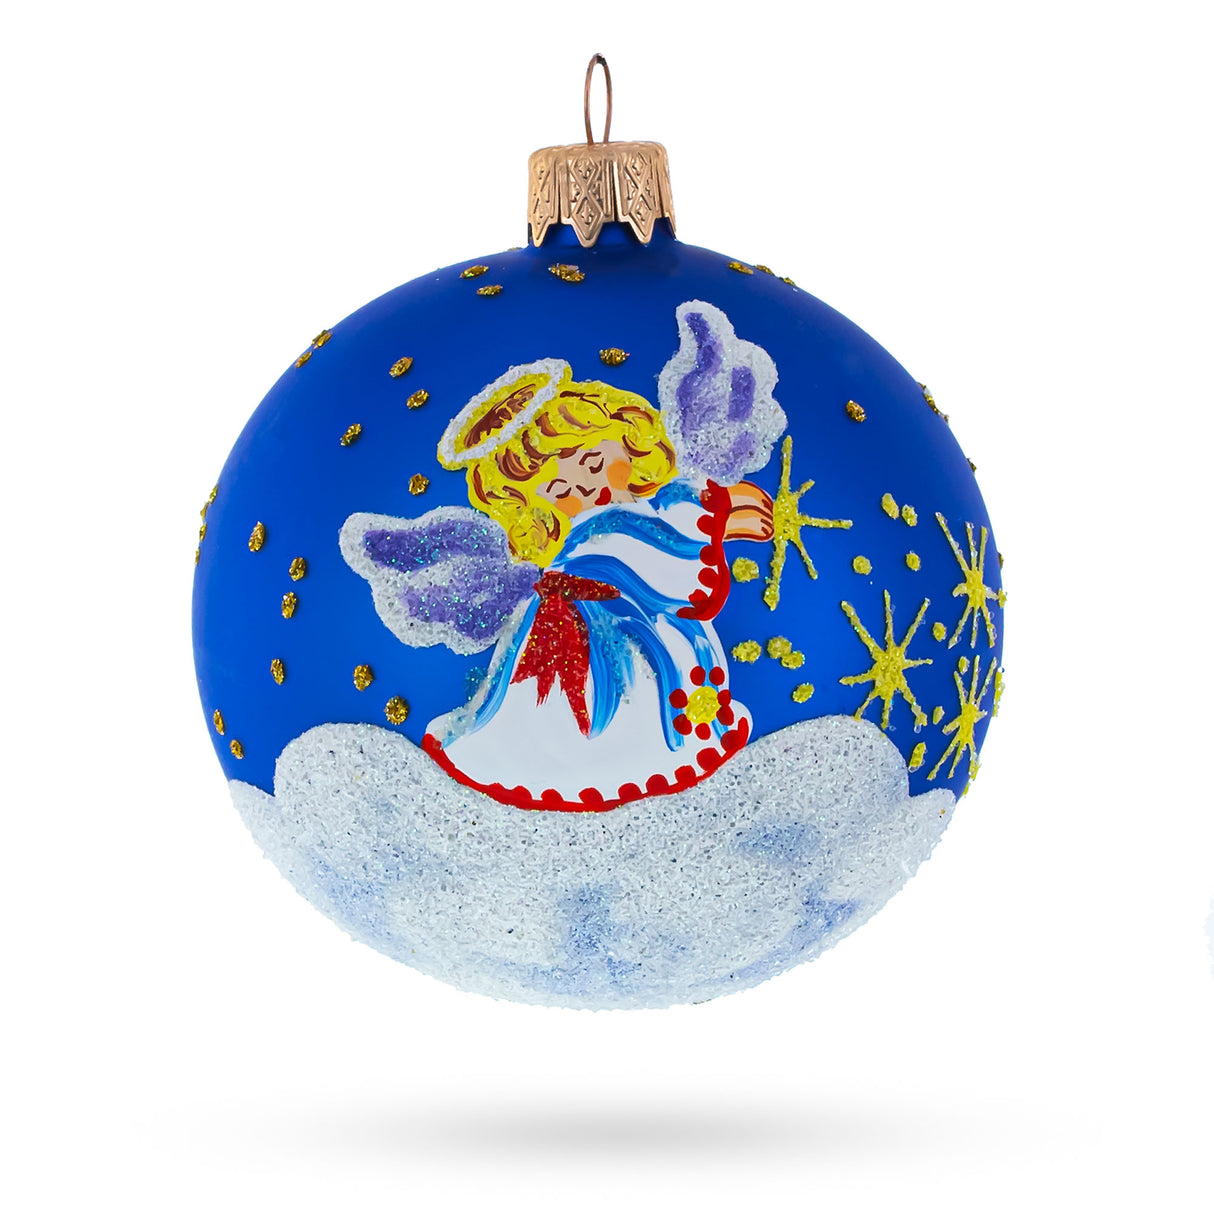 Heavenly Angel in the Sky - Blown Glass Ball Christmas Ornament 3.25 Inches in Blue color, Round shape